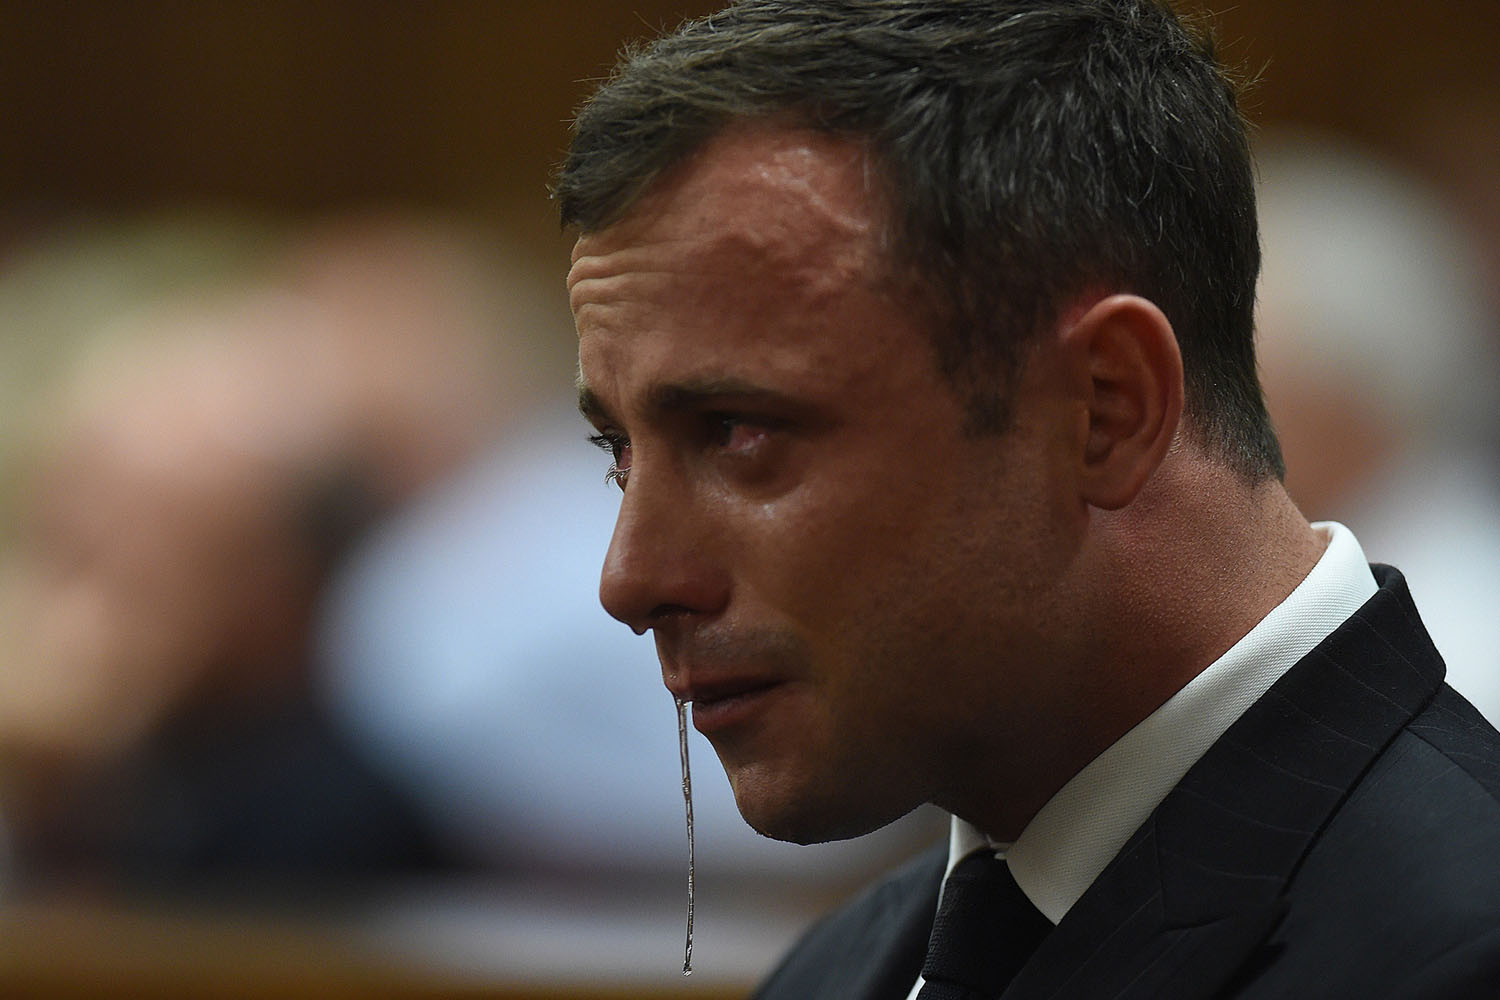 Sept. 11, 2014. An emotional Oscar Pistorius is seen in the dock as  judgment is handed down in his murder trial at the High Court in Pretoria. Pistorius has been acquitted of murdering his girlfriend Reeva Steenkamp.